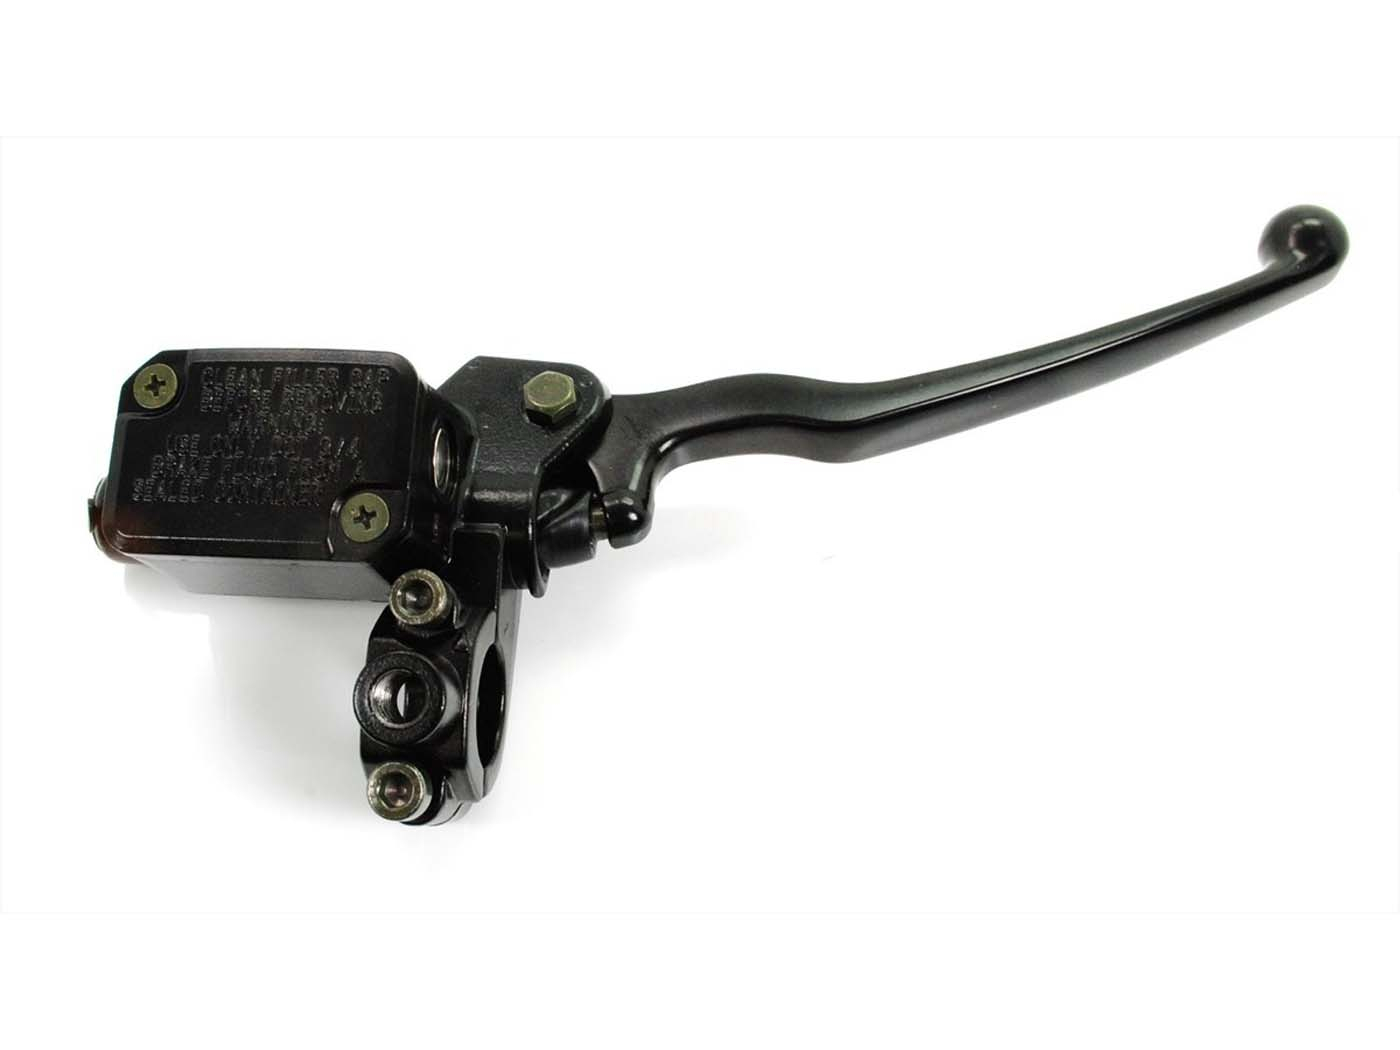 Handbrake Pump For Moped, Scooter, Motorcycle